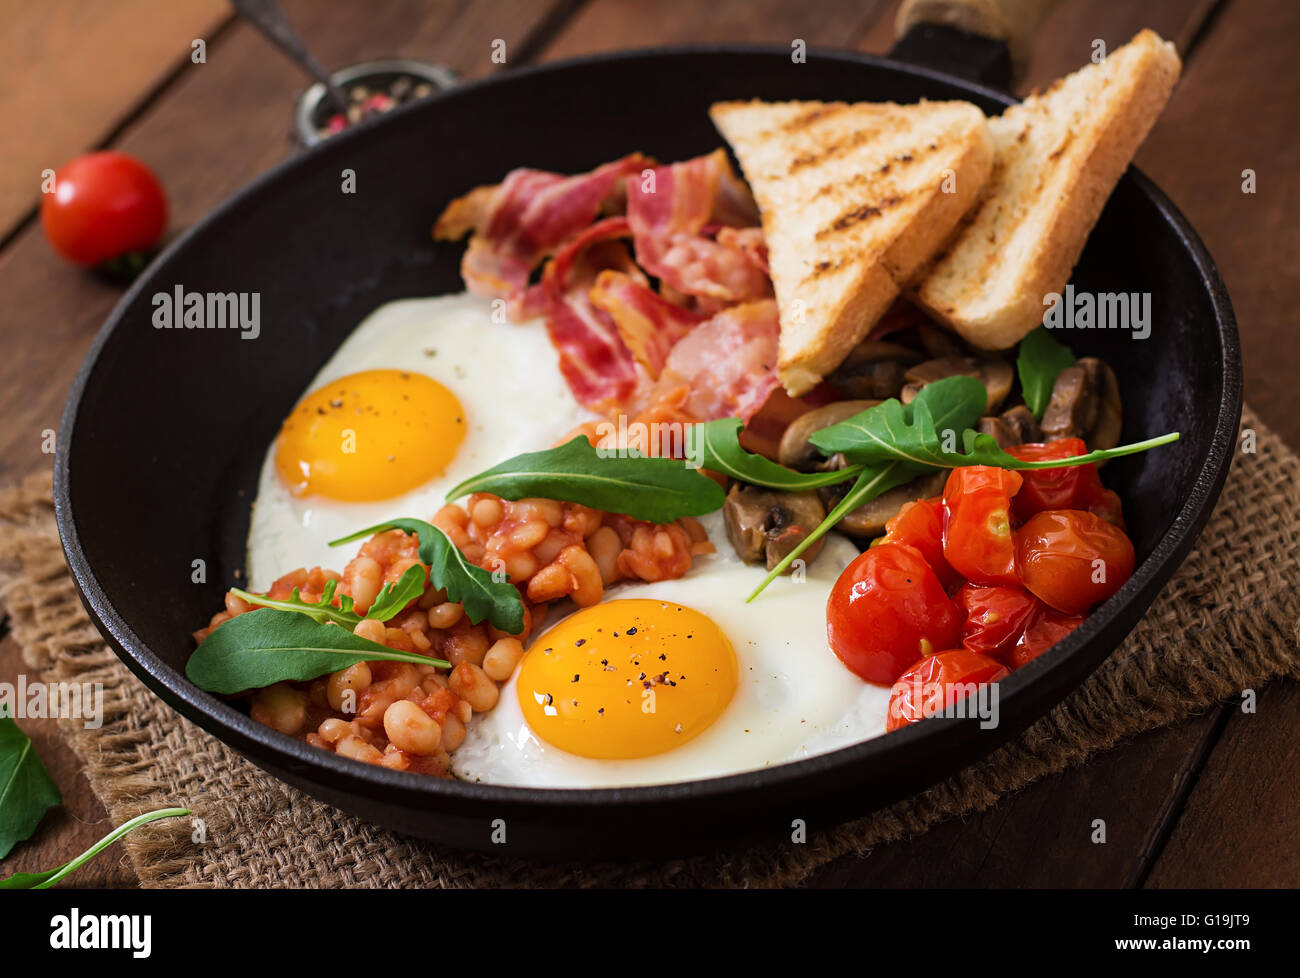 English breakfast - fried egg, beans, tomatoes, mushrooms, bacon and toast Stock Photo